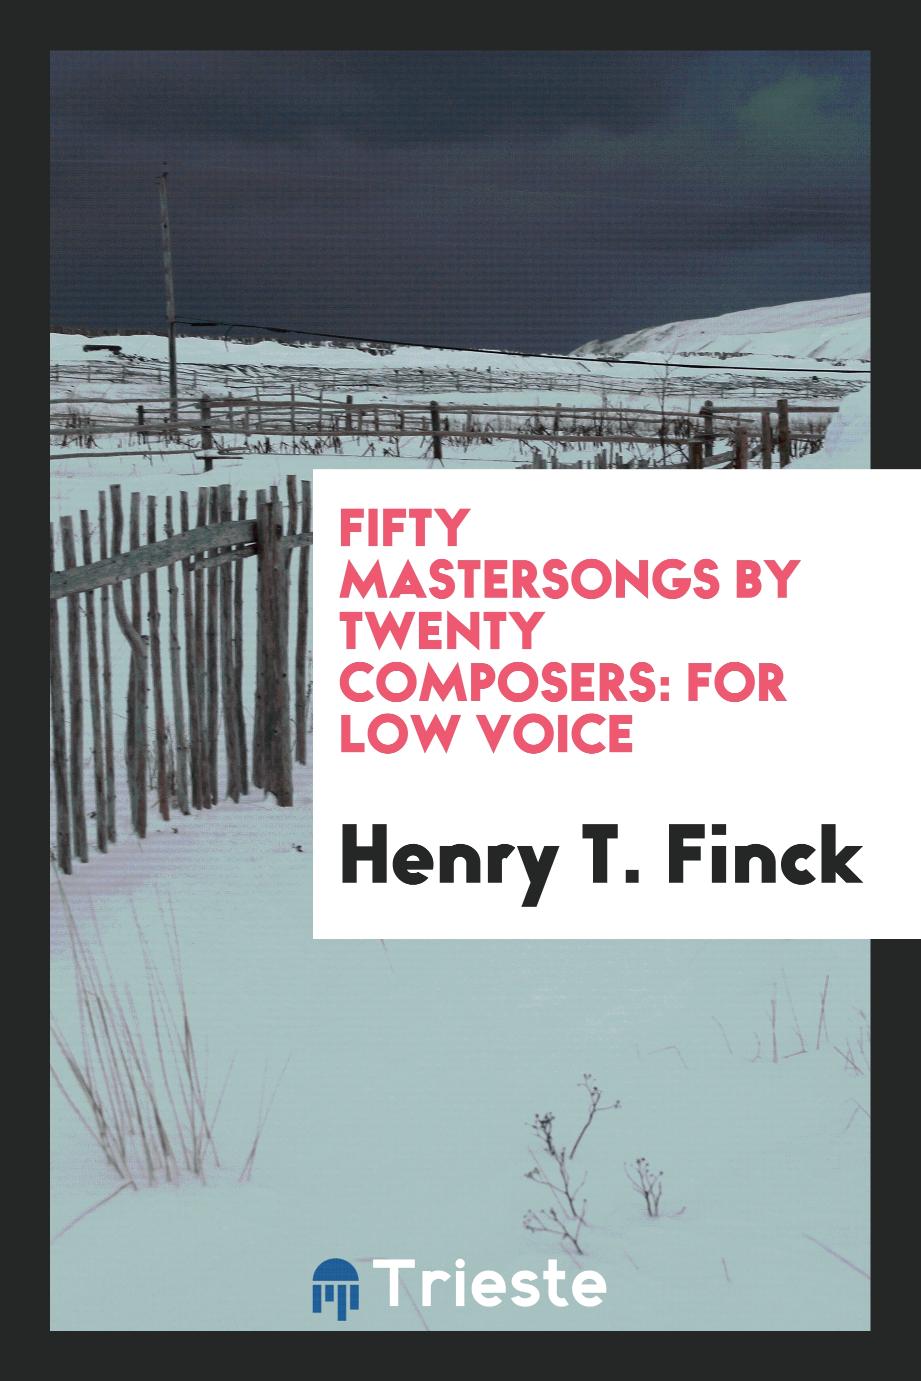 Fifty Mastersongs by Twenty Composers: For Low Voice